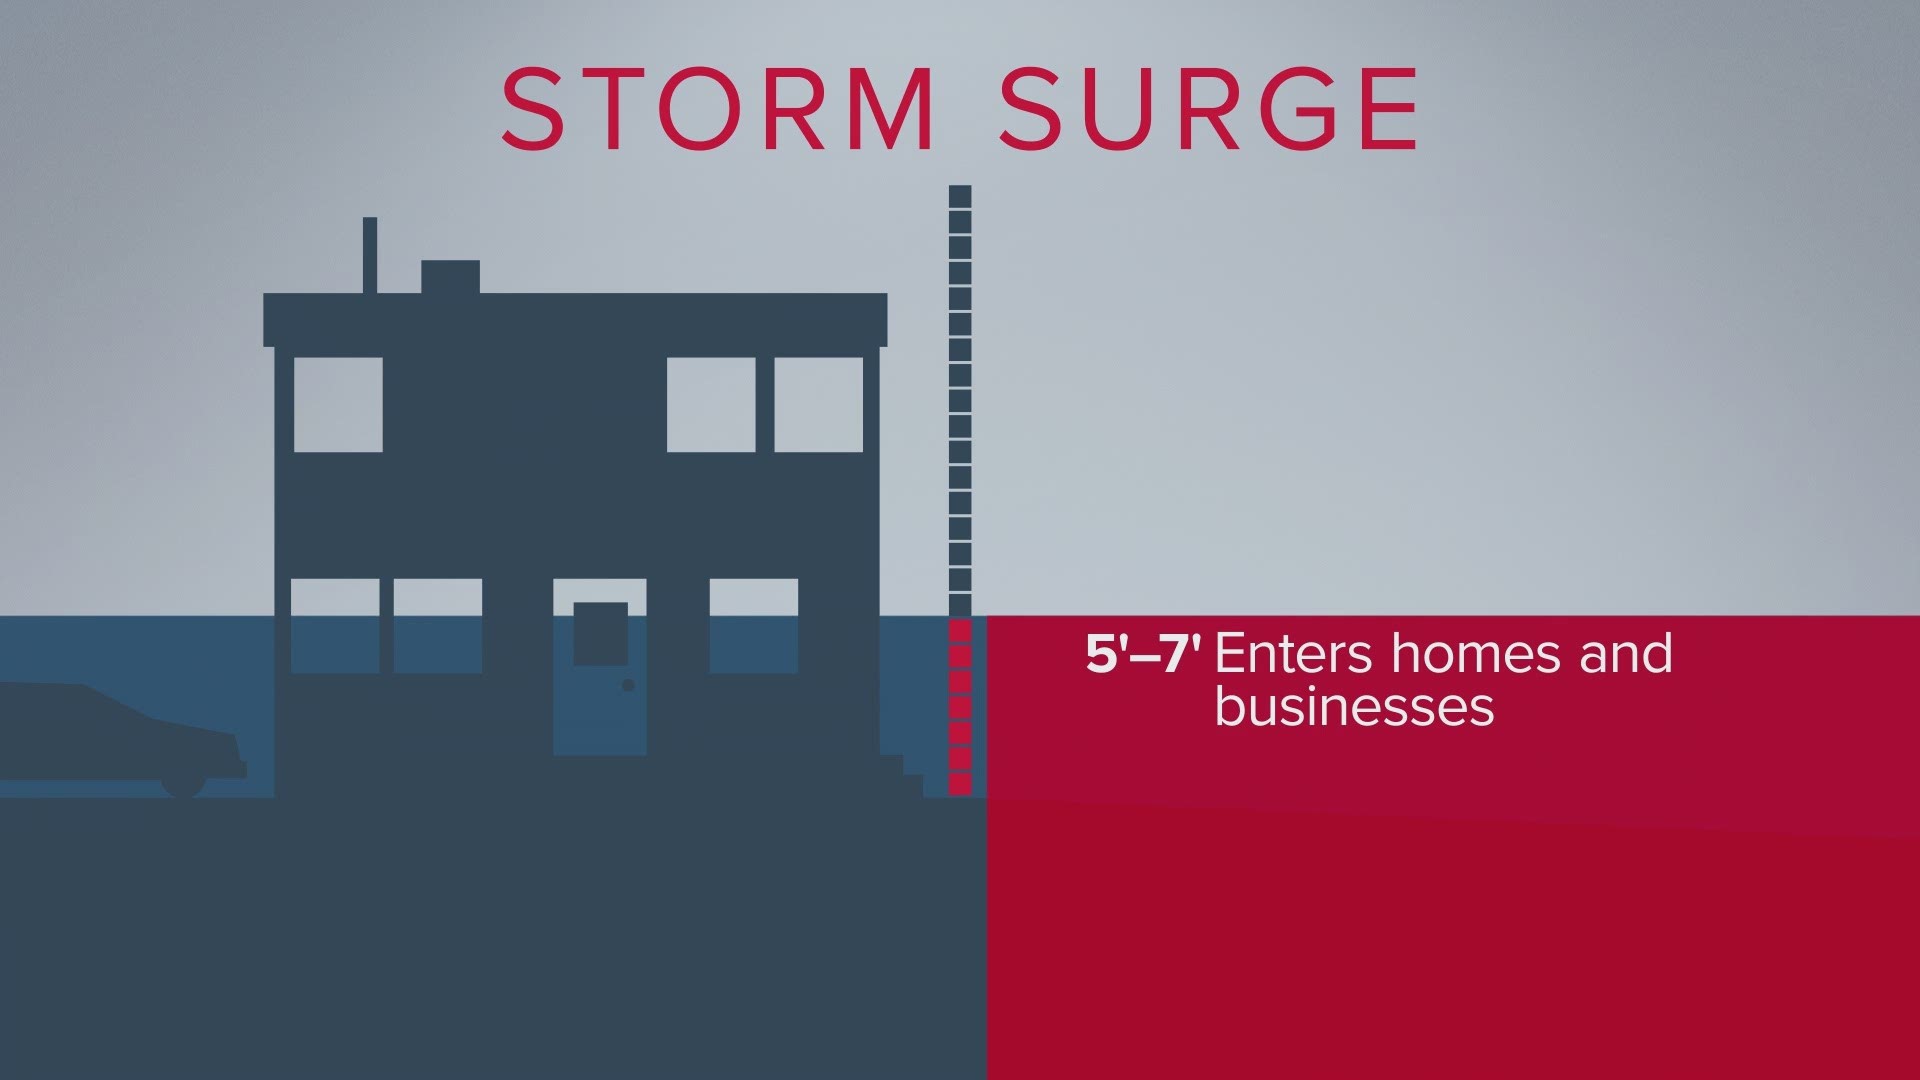 Storm surge during hurricanes can prove deadly and be devastating to property and homes.